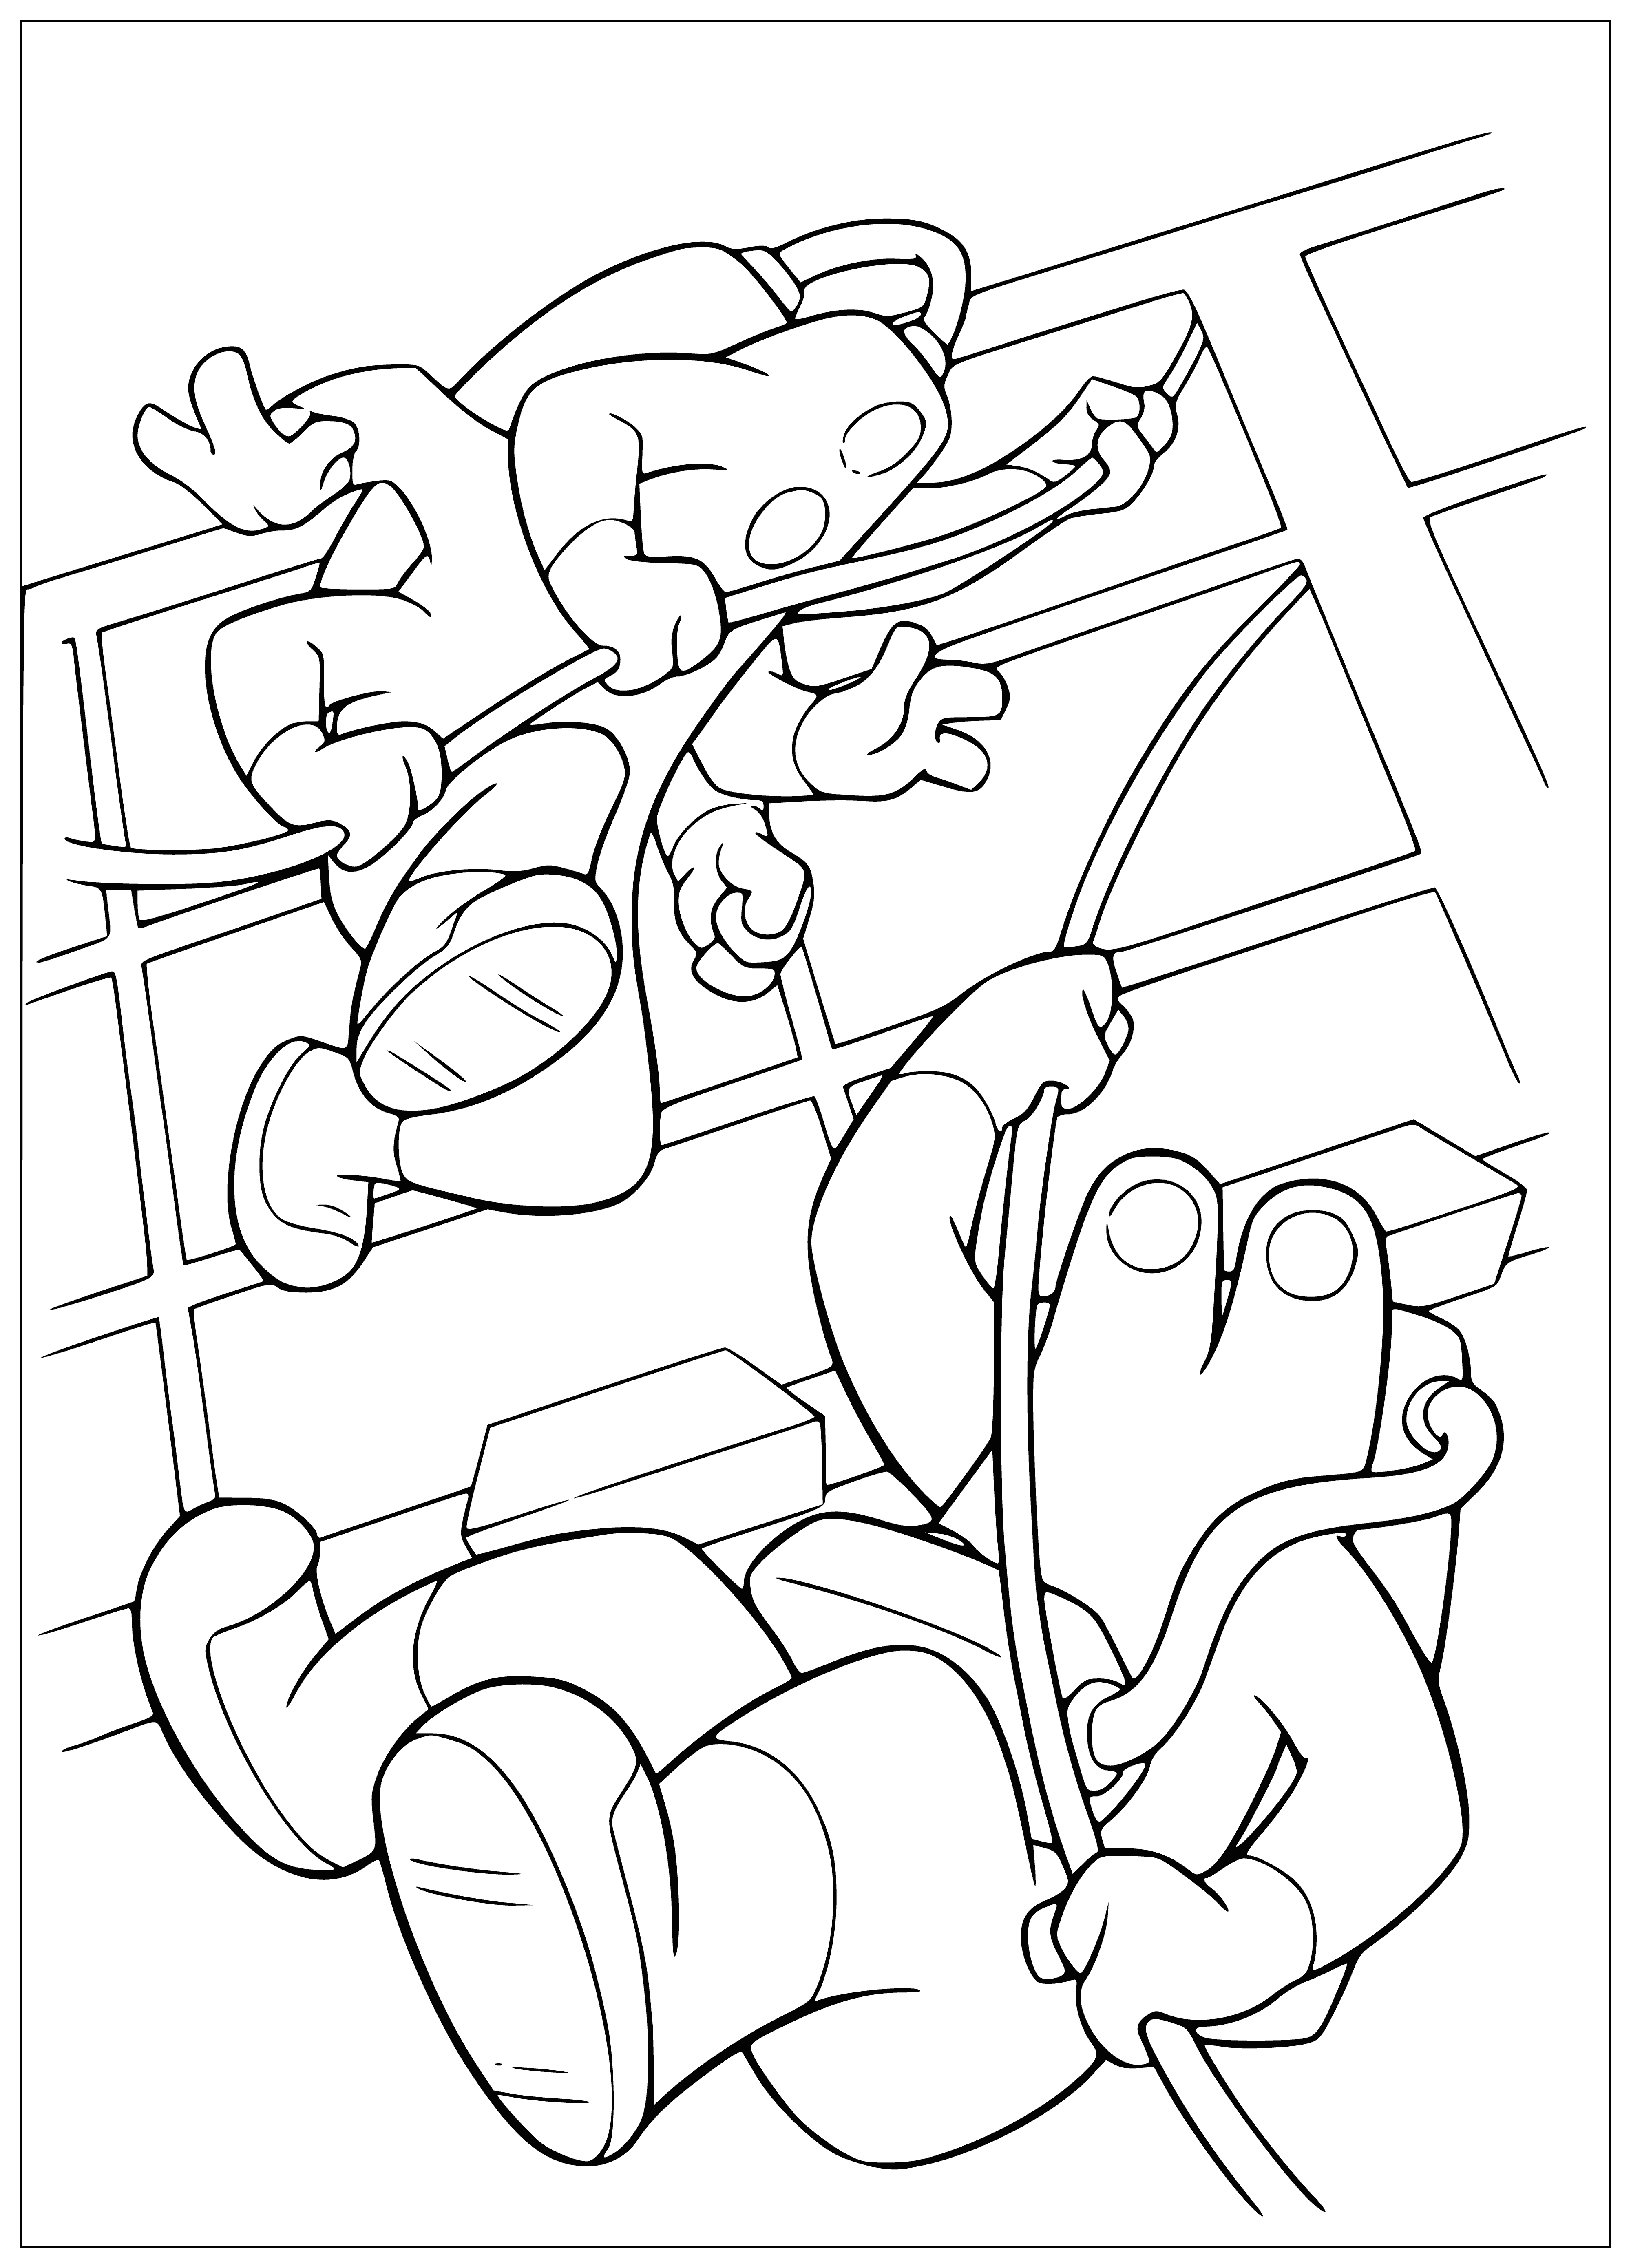 Danger of infection! coloring page